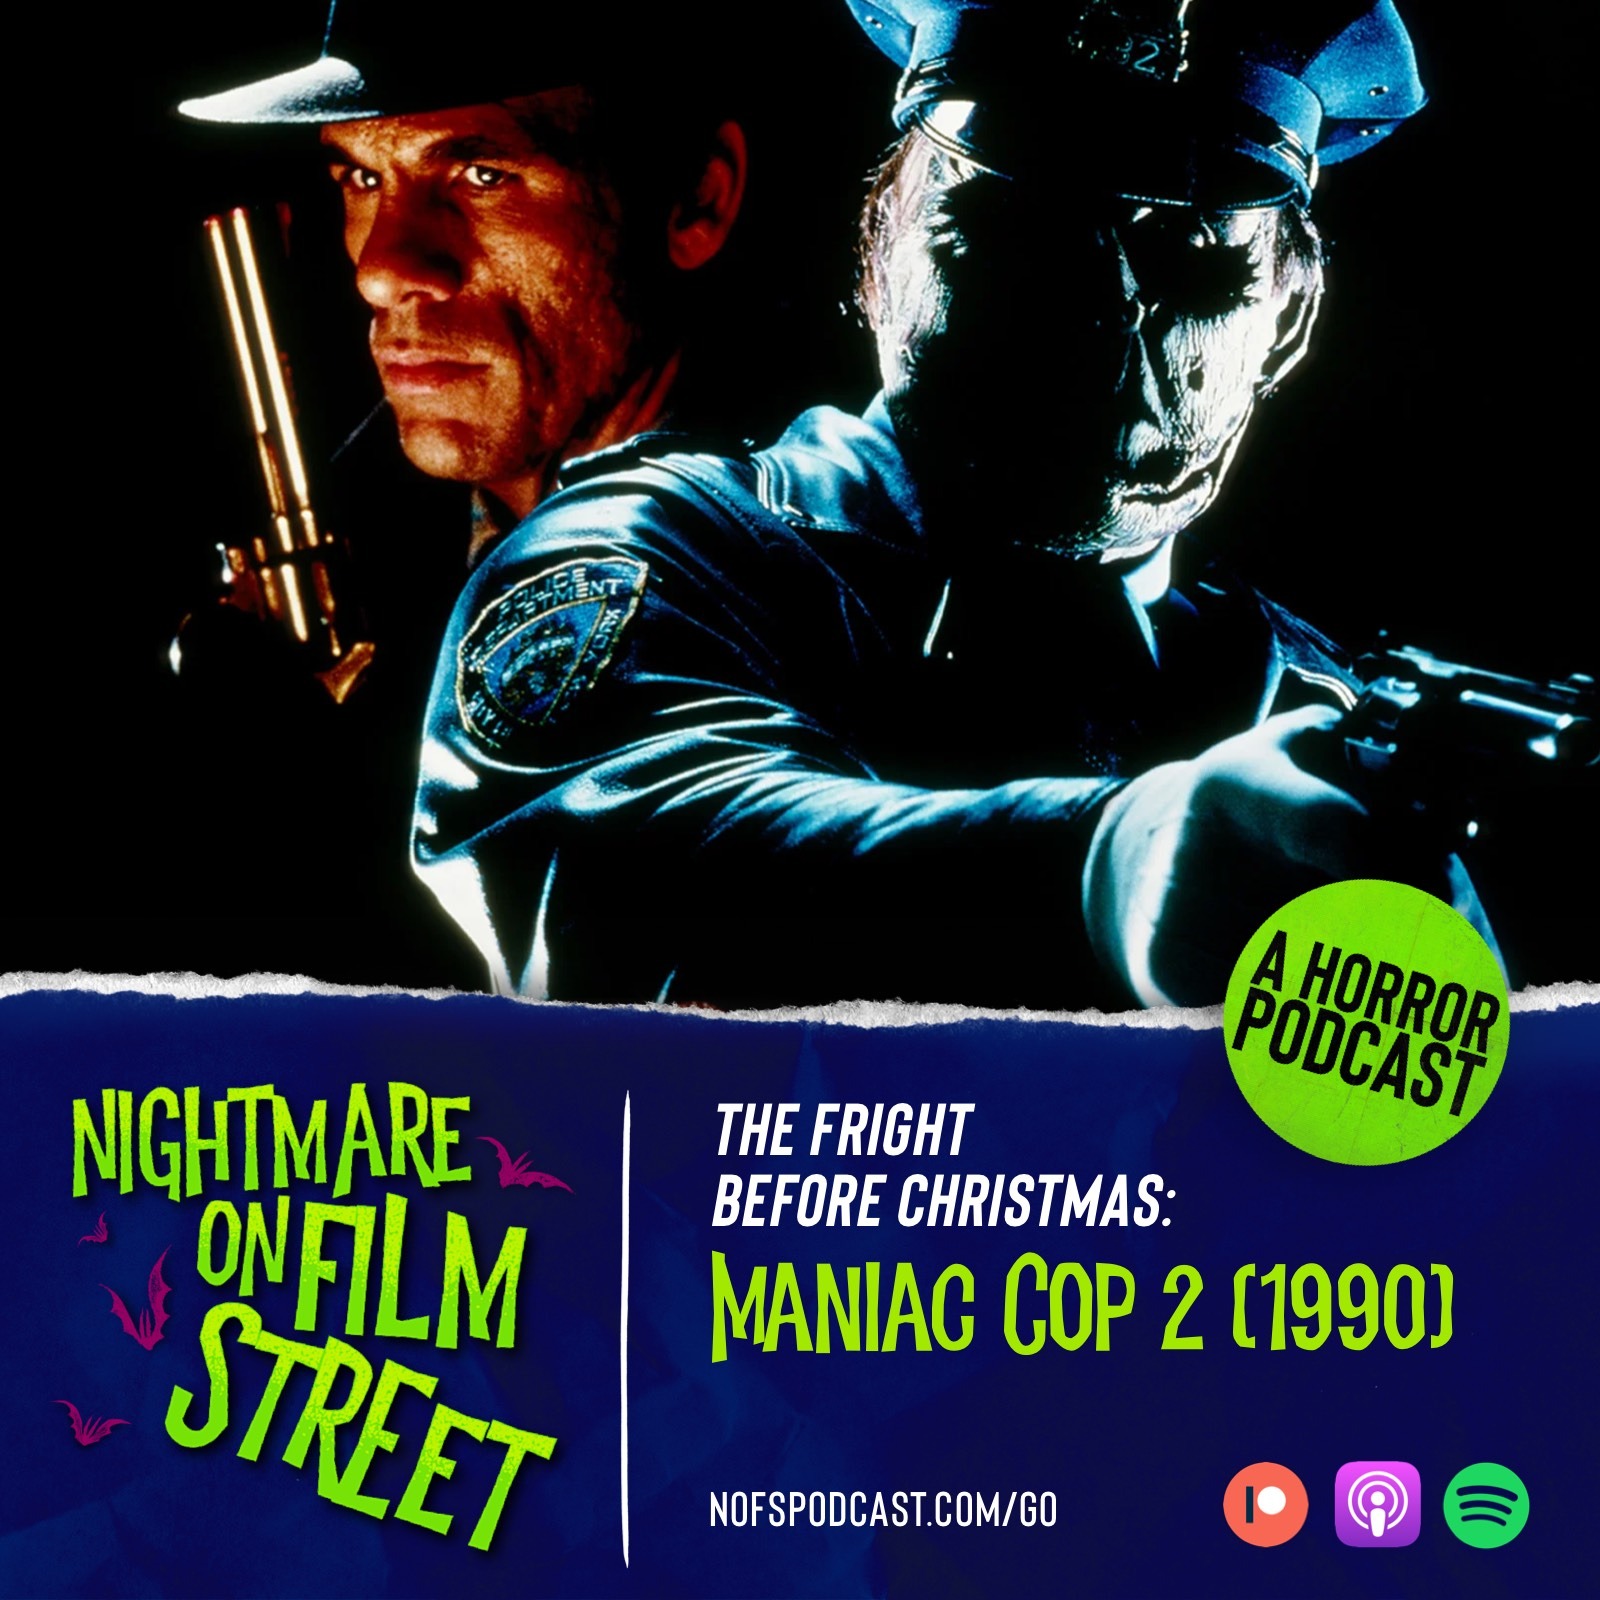 The Fright Before Christmas Part I: Maniac Cop 2 (1990)